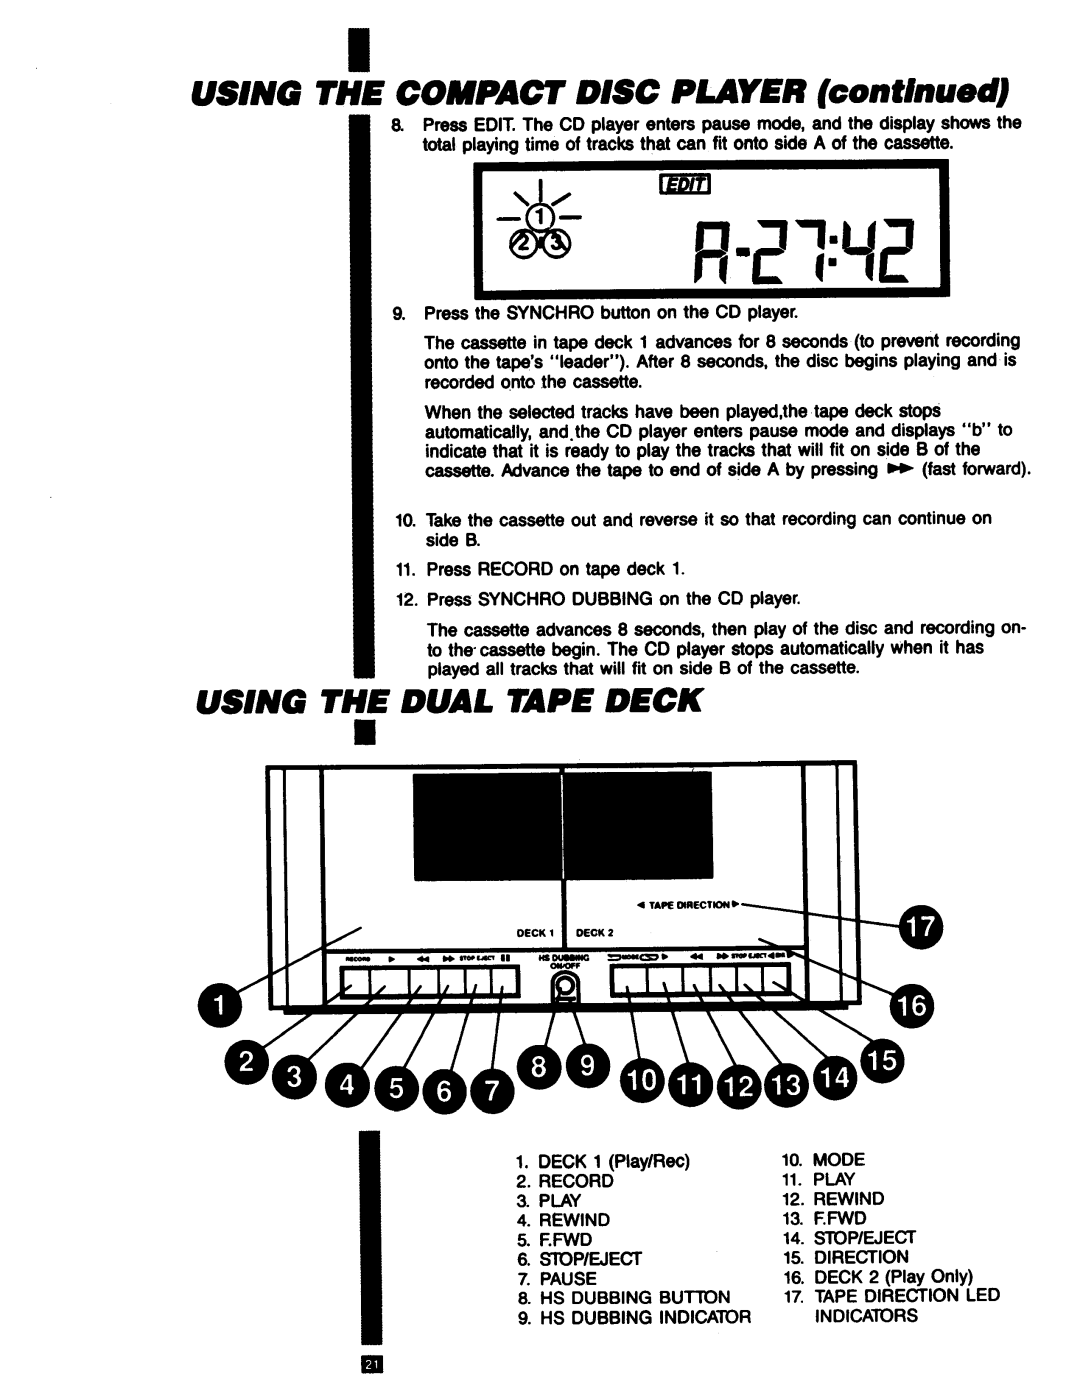 RCA RP-9753 manual Using The Dual Tape Deck, USING THE COMPACT DISC PLAYER continued 